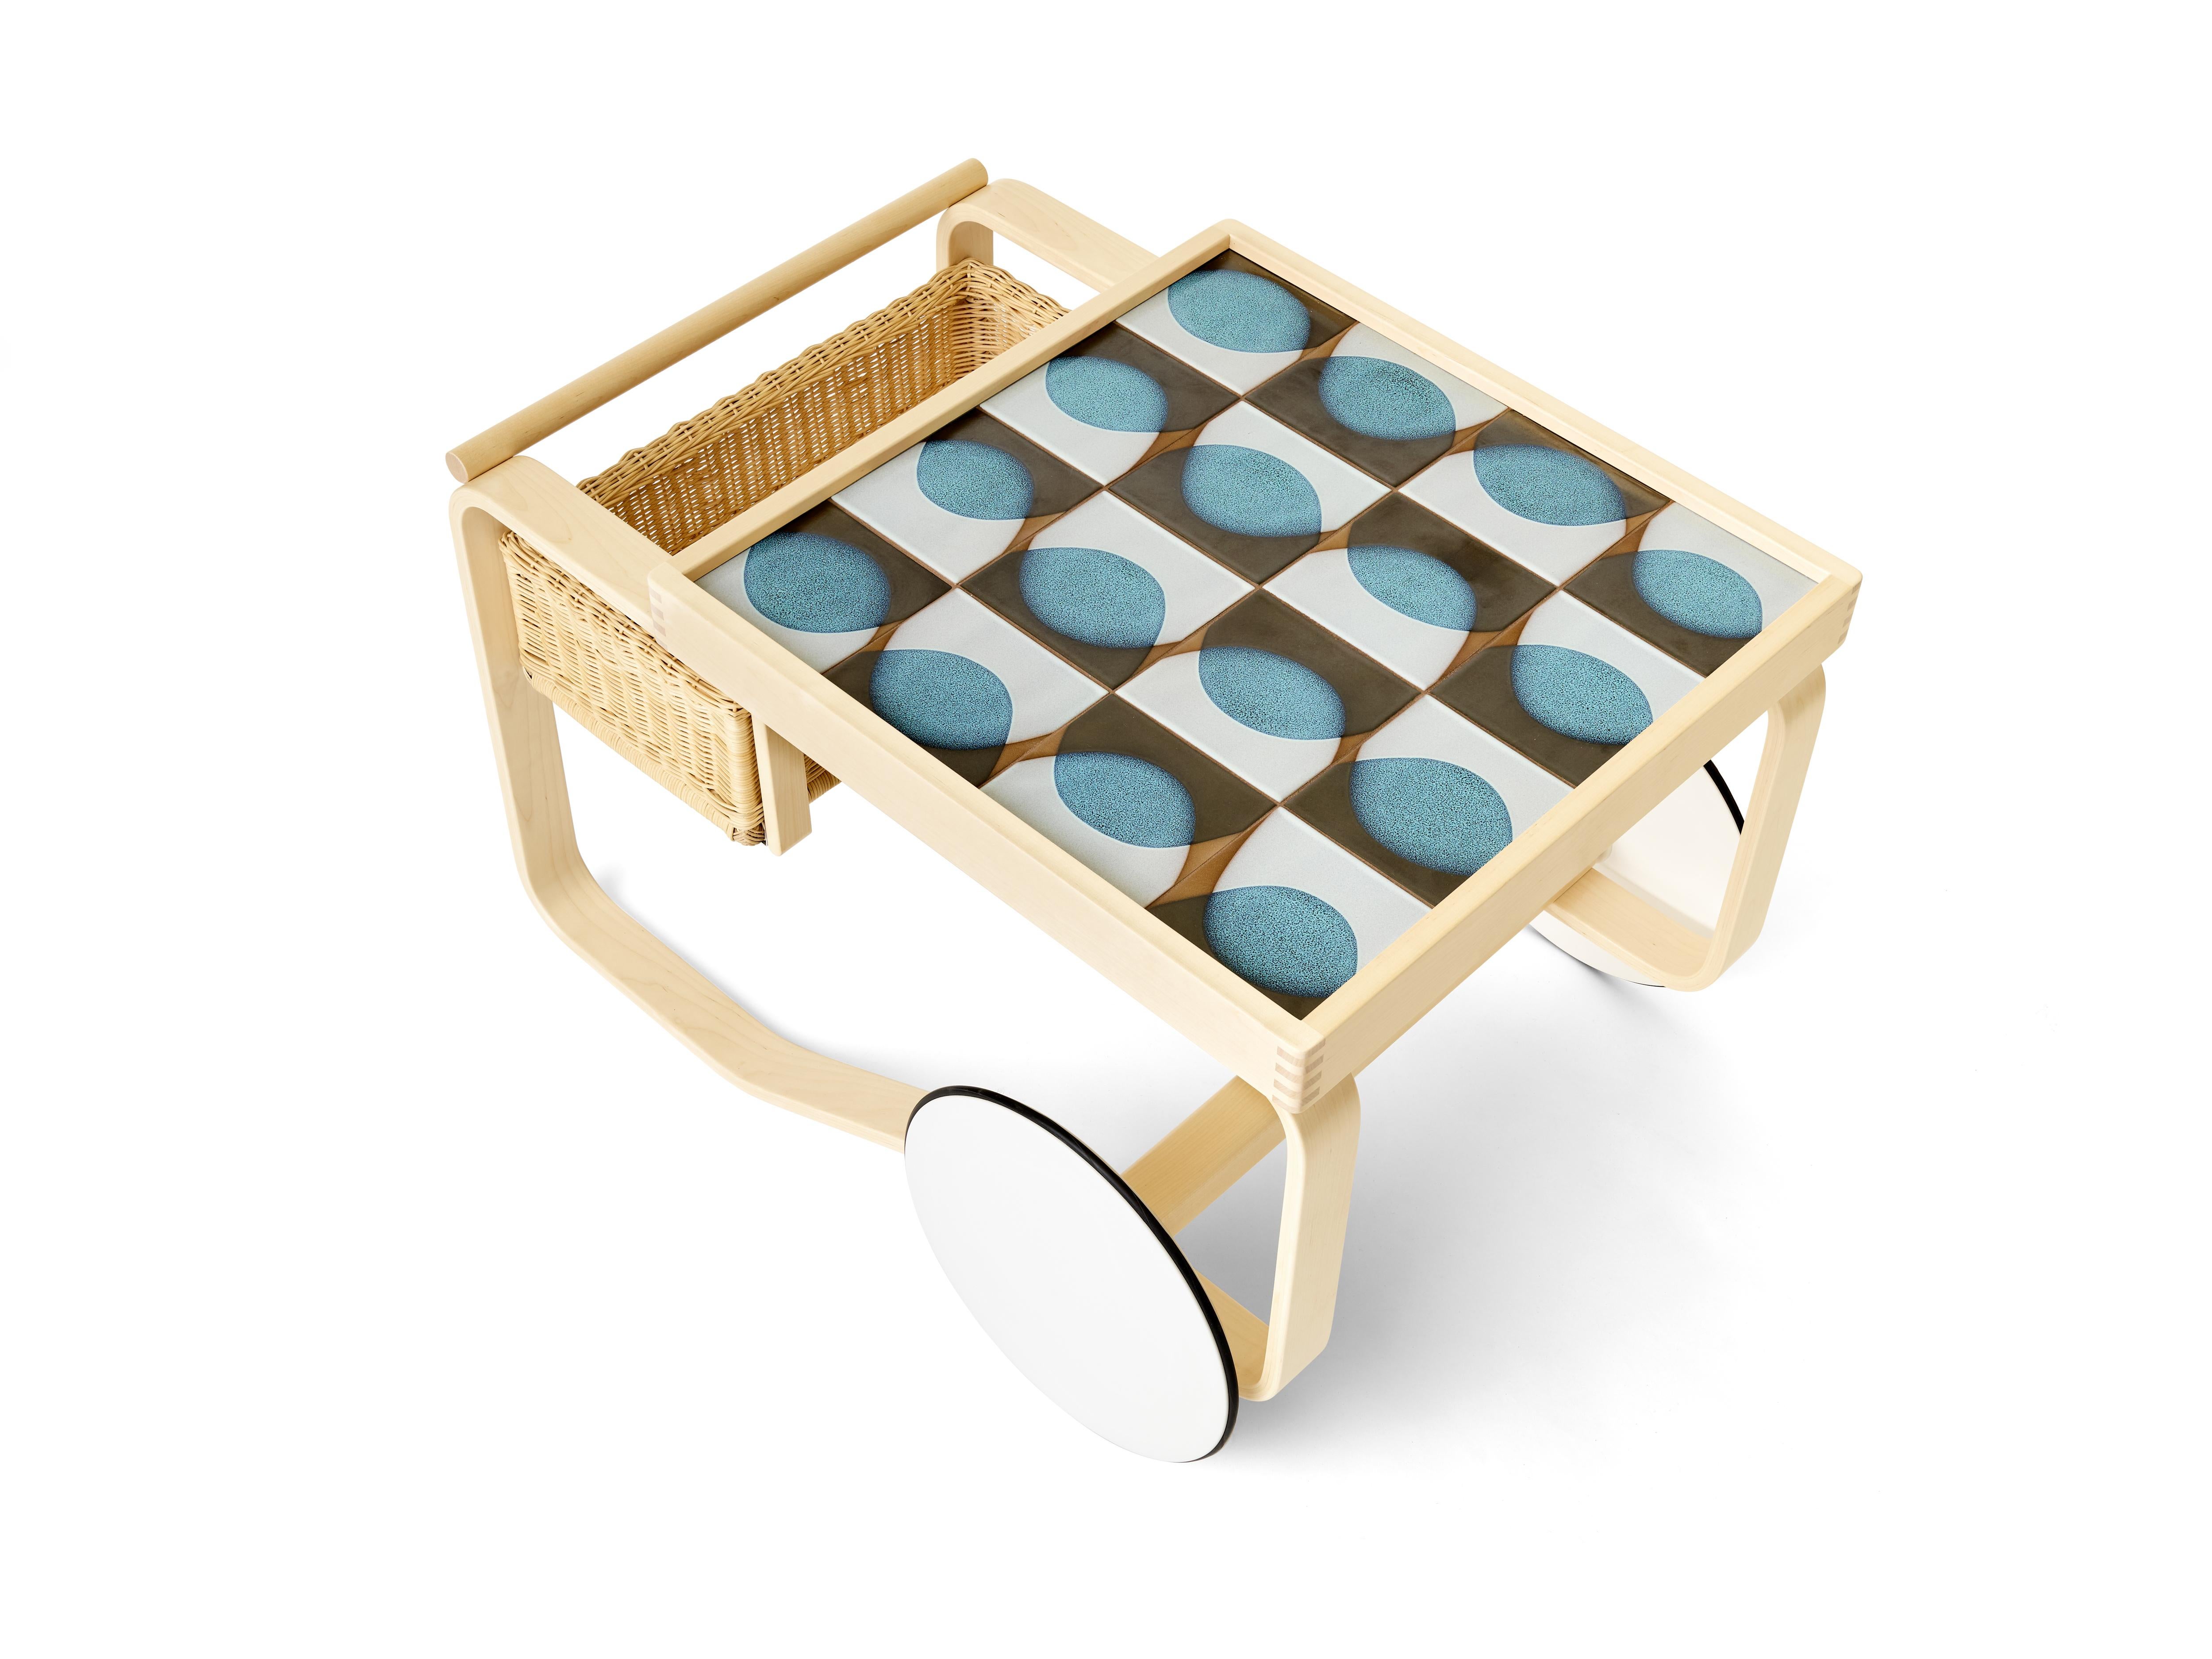 Experimental glazes from the 1940s meet innovative wood-bending techniques from the 1930s for a distinctive, memorable collection. As an edition of six designs with only six of each made, the iconic Artek tea trolley is inlaid with tile inspired by